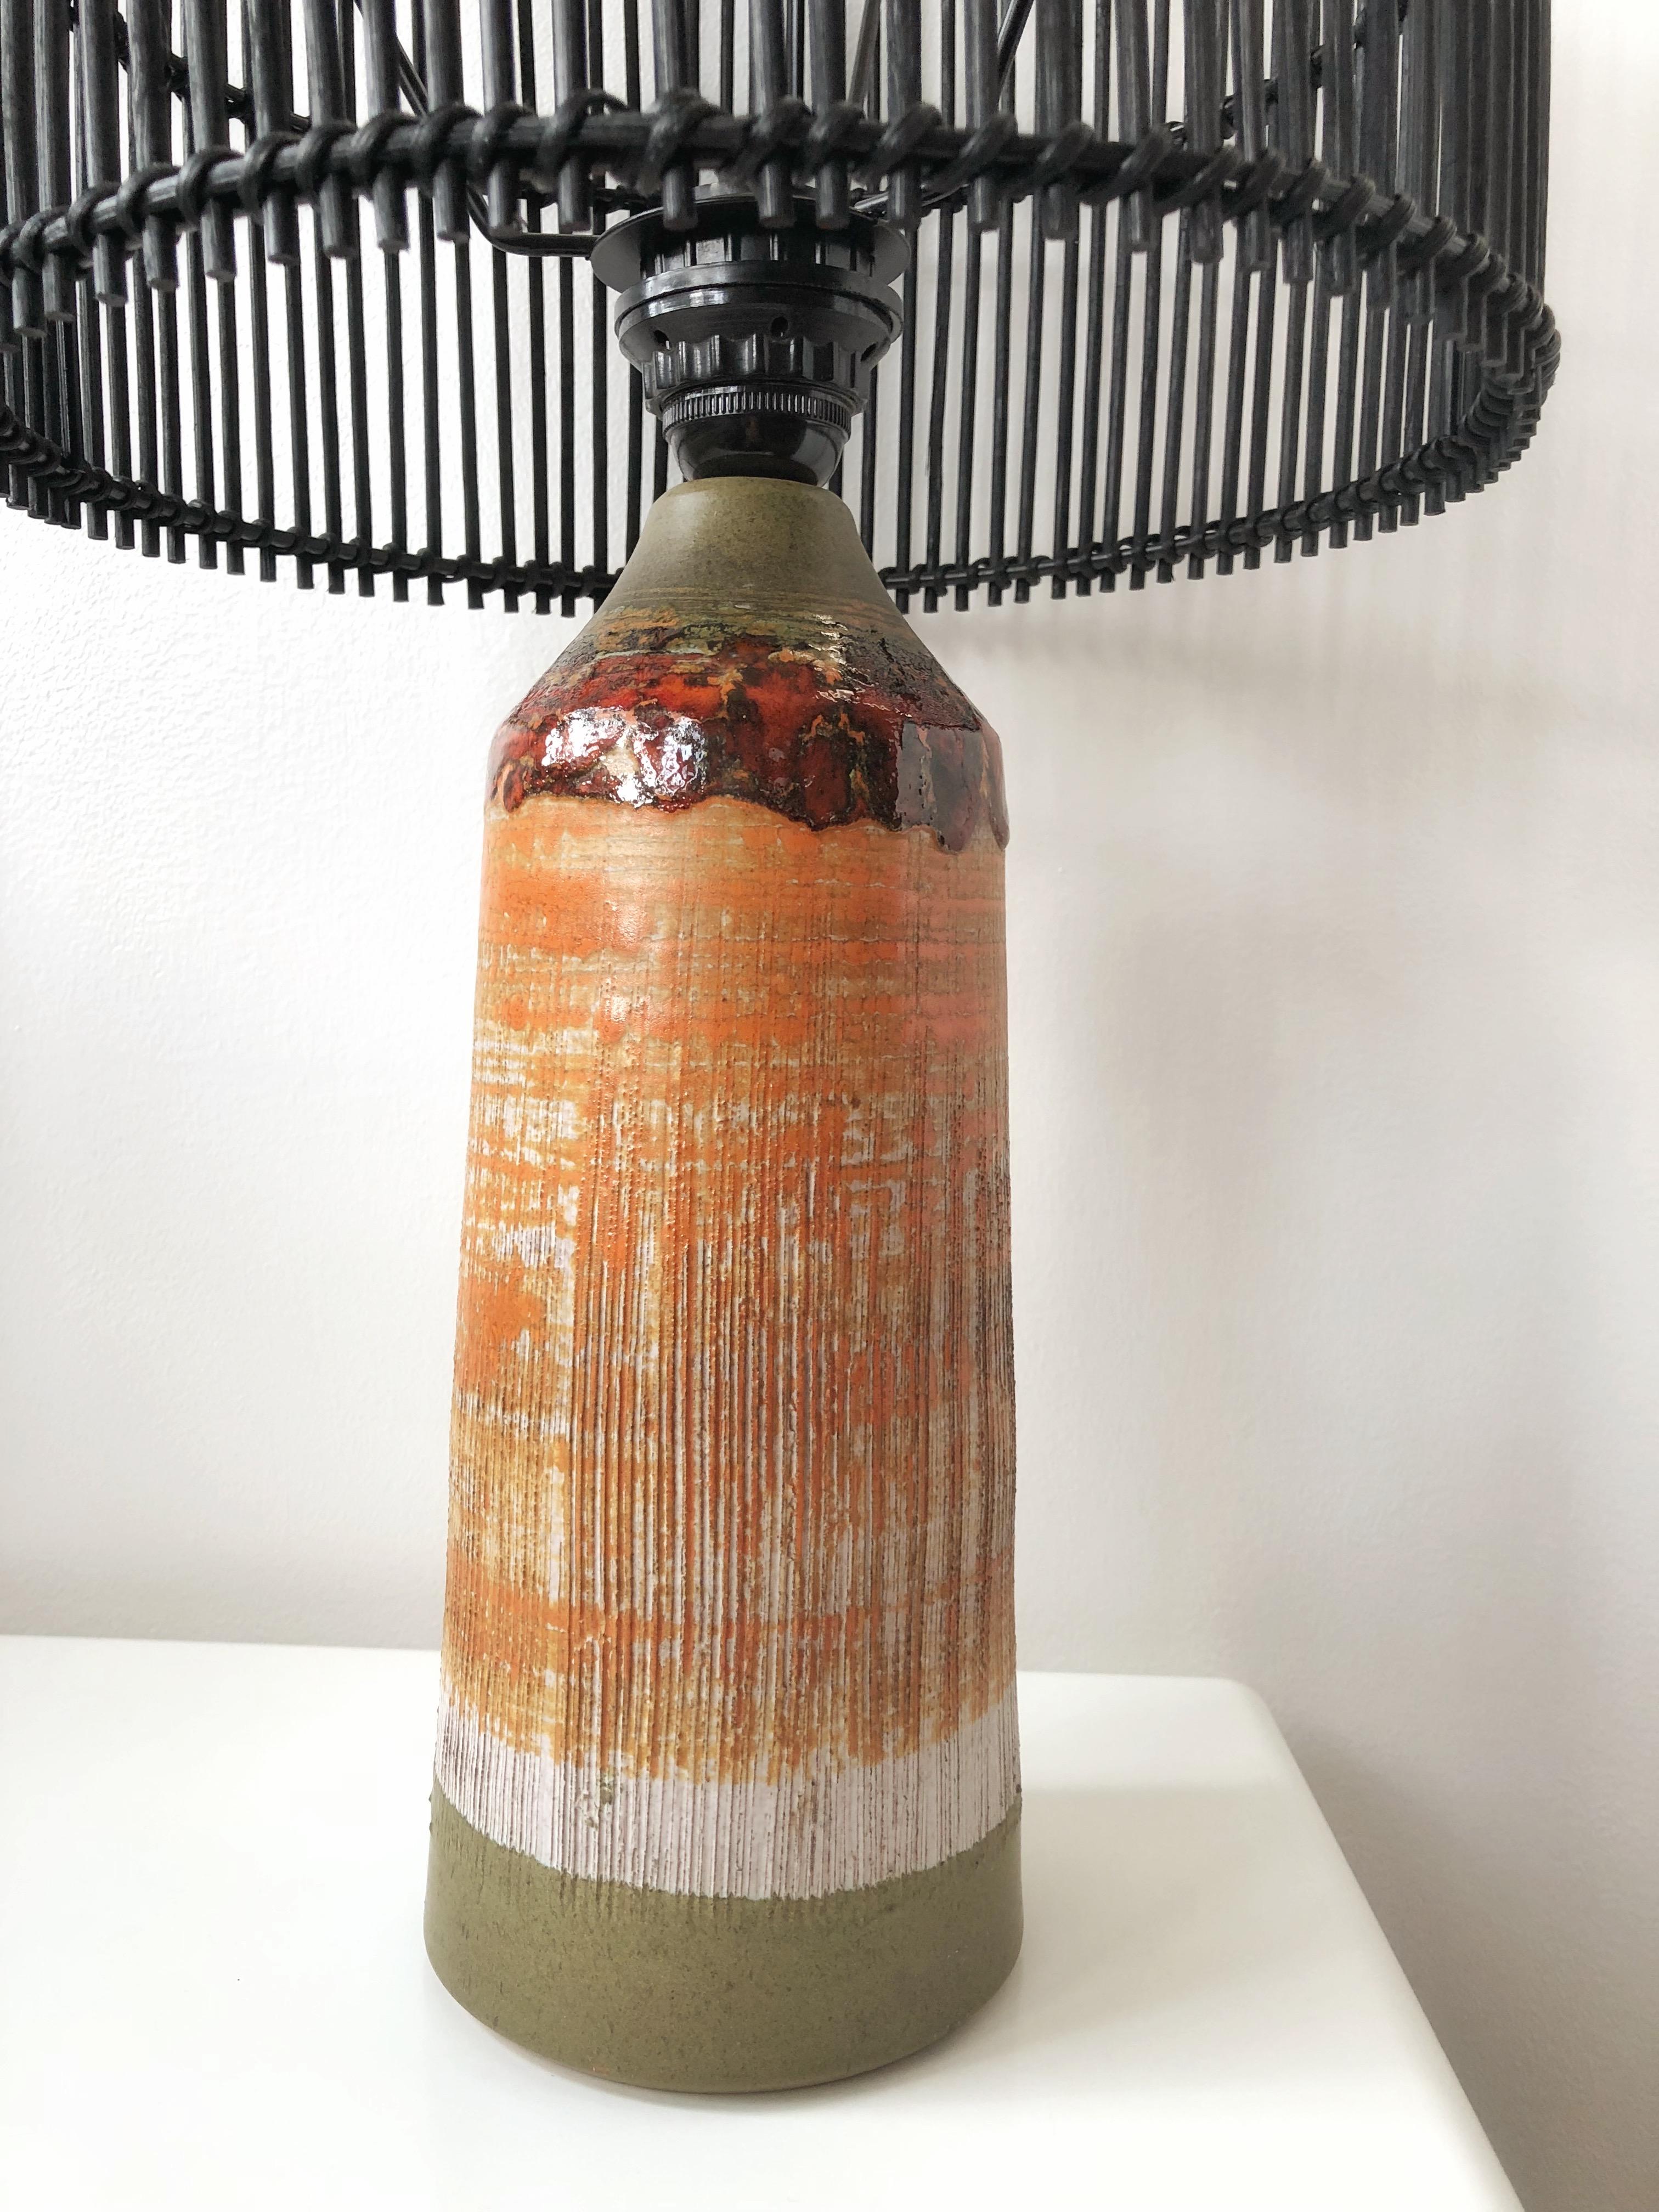 Swedish Modern tall, massive, brutalist block colored ceramic lamp by Tilgman Keramik.
European wiring, rewiring on request.
Very good condition but a small flake is lost under the lamp base, this small damage is retushed and painted green, see last